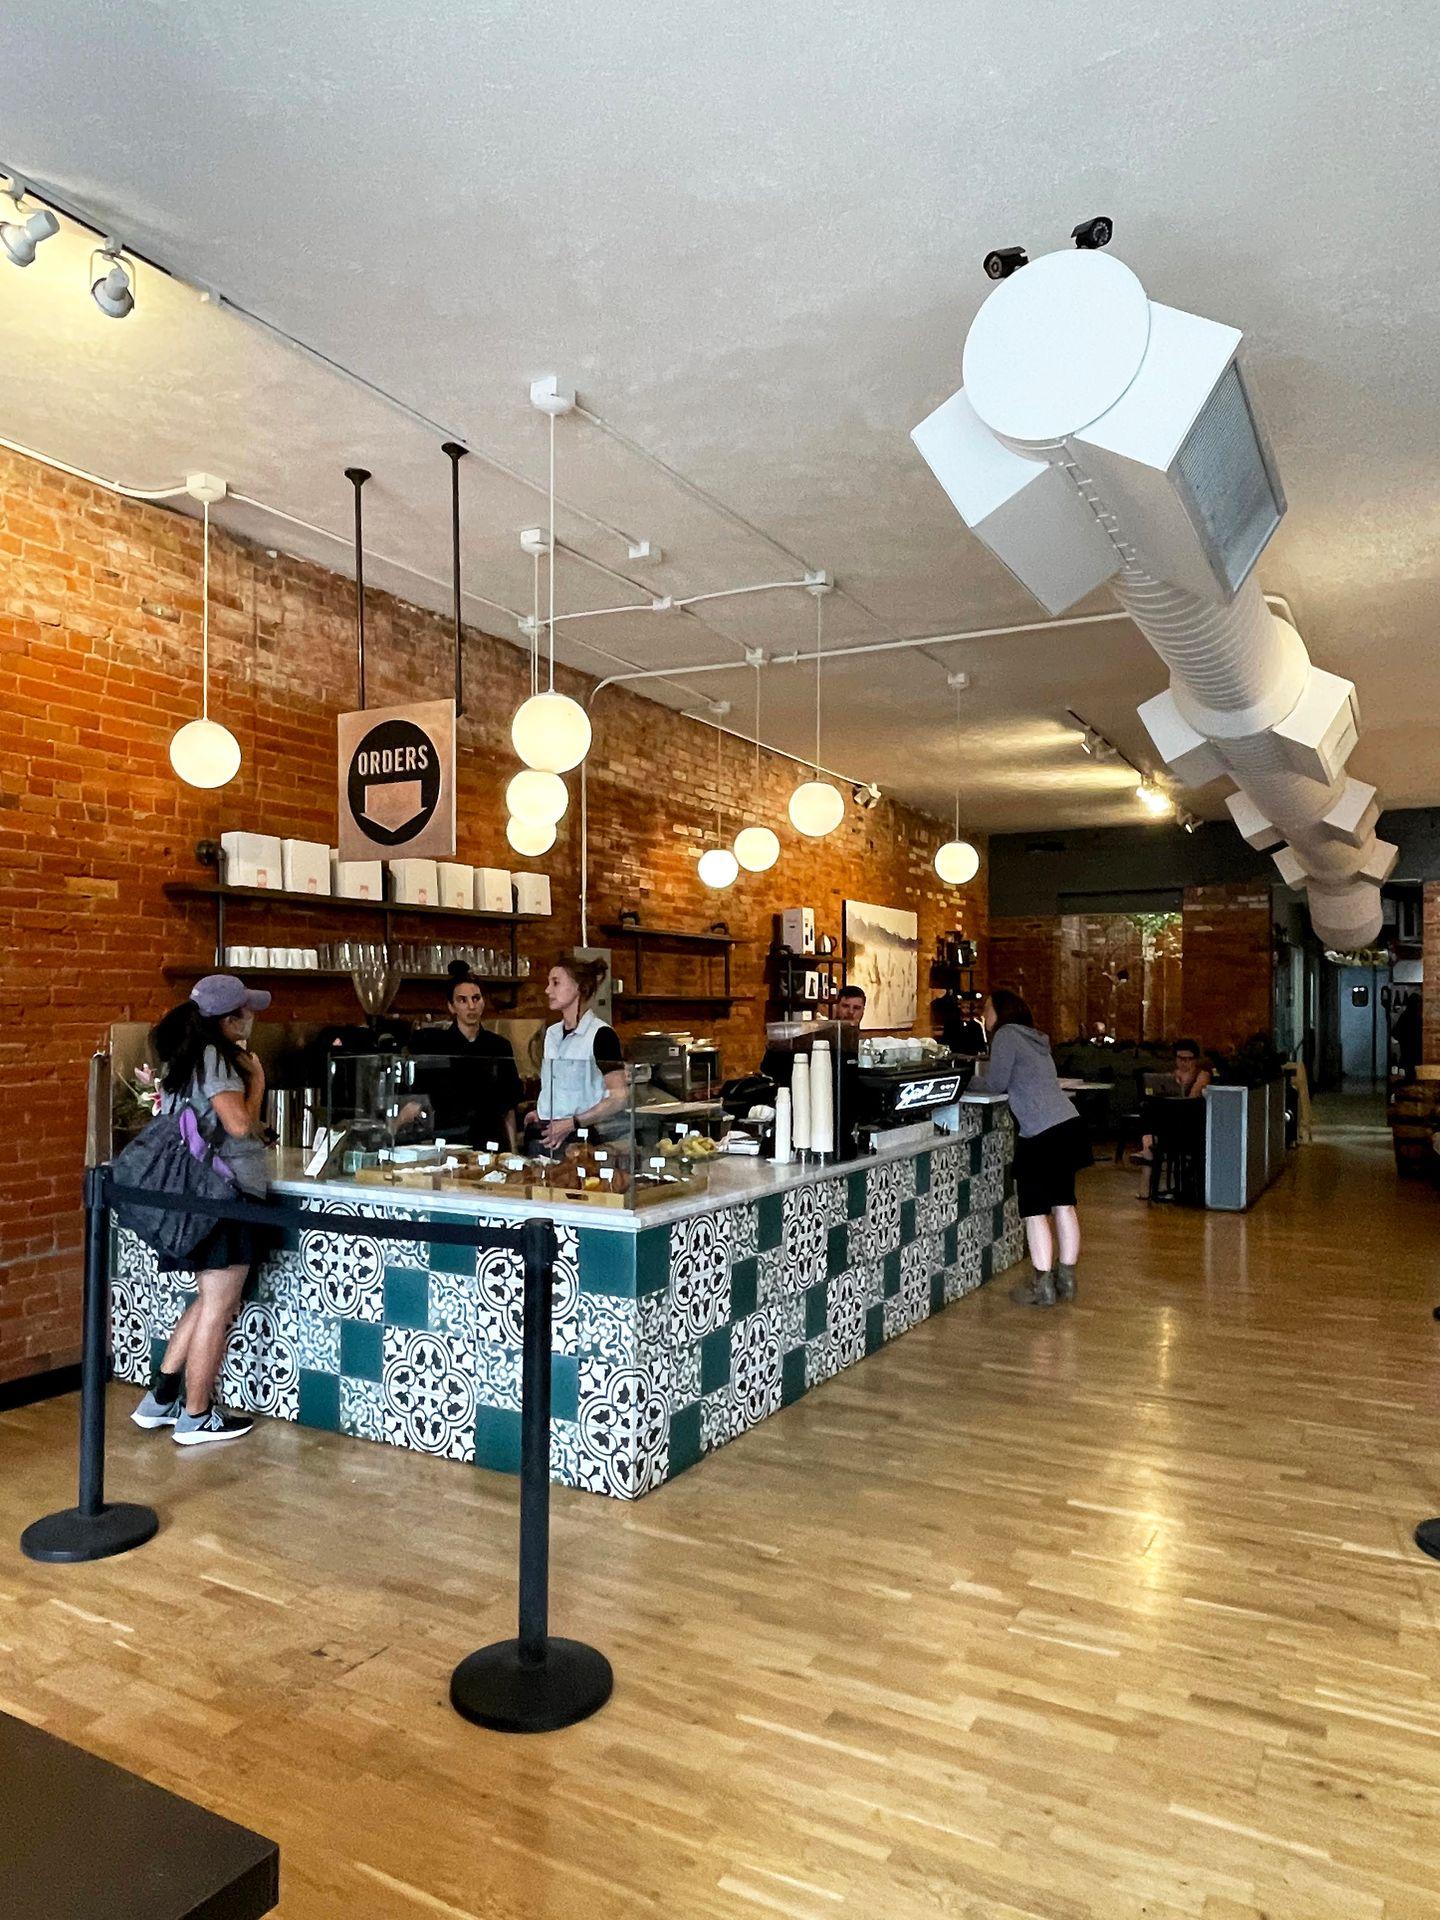 The interior of a coffee shop with wood floors and ceiling and blue and white tiled counter.